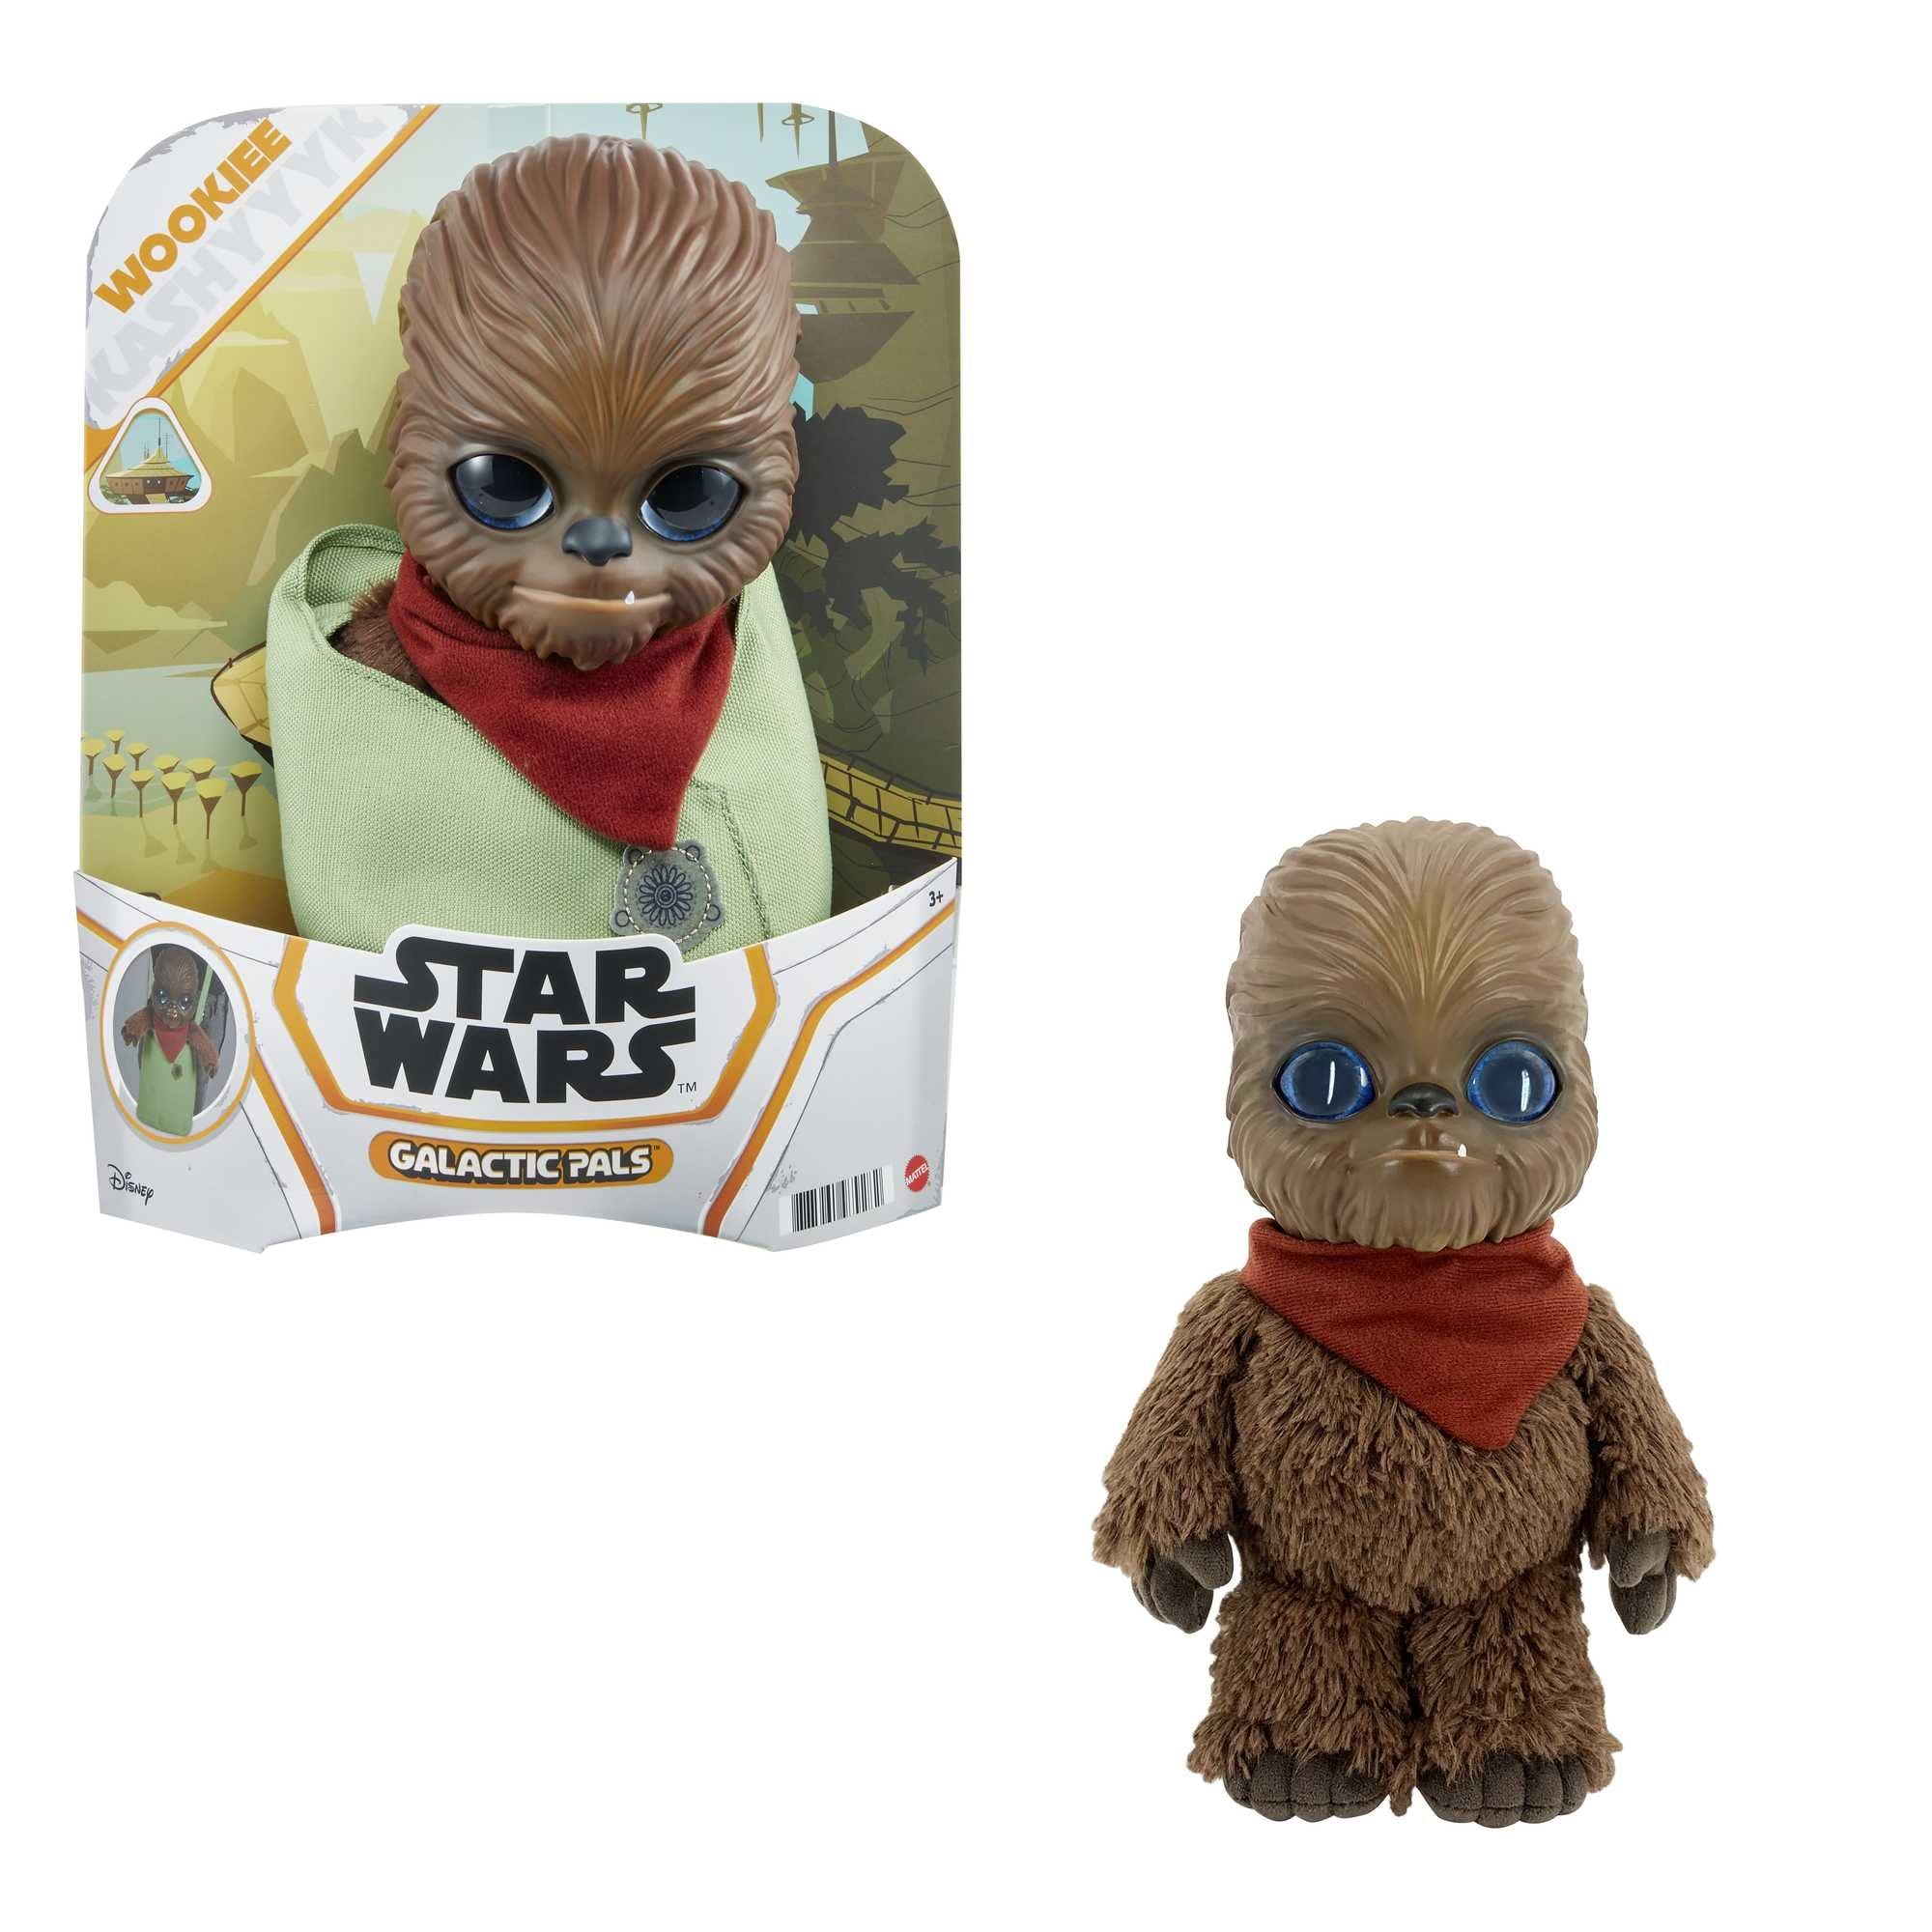 11" Star Wars Galactic Pals Plush w/ Carrier (Wookiee) $9.44 + Free Shipping w/ Prime or on $35+